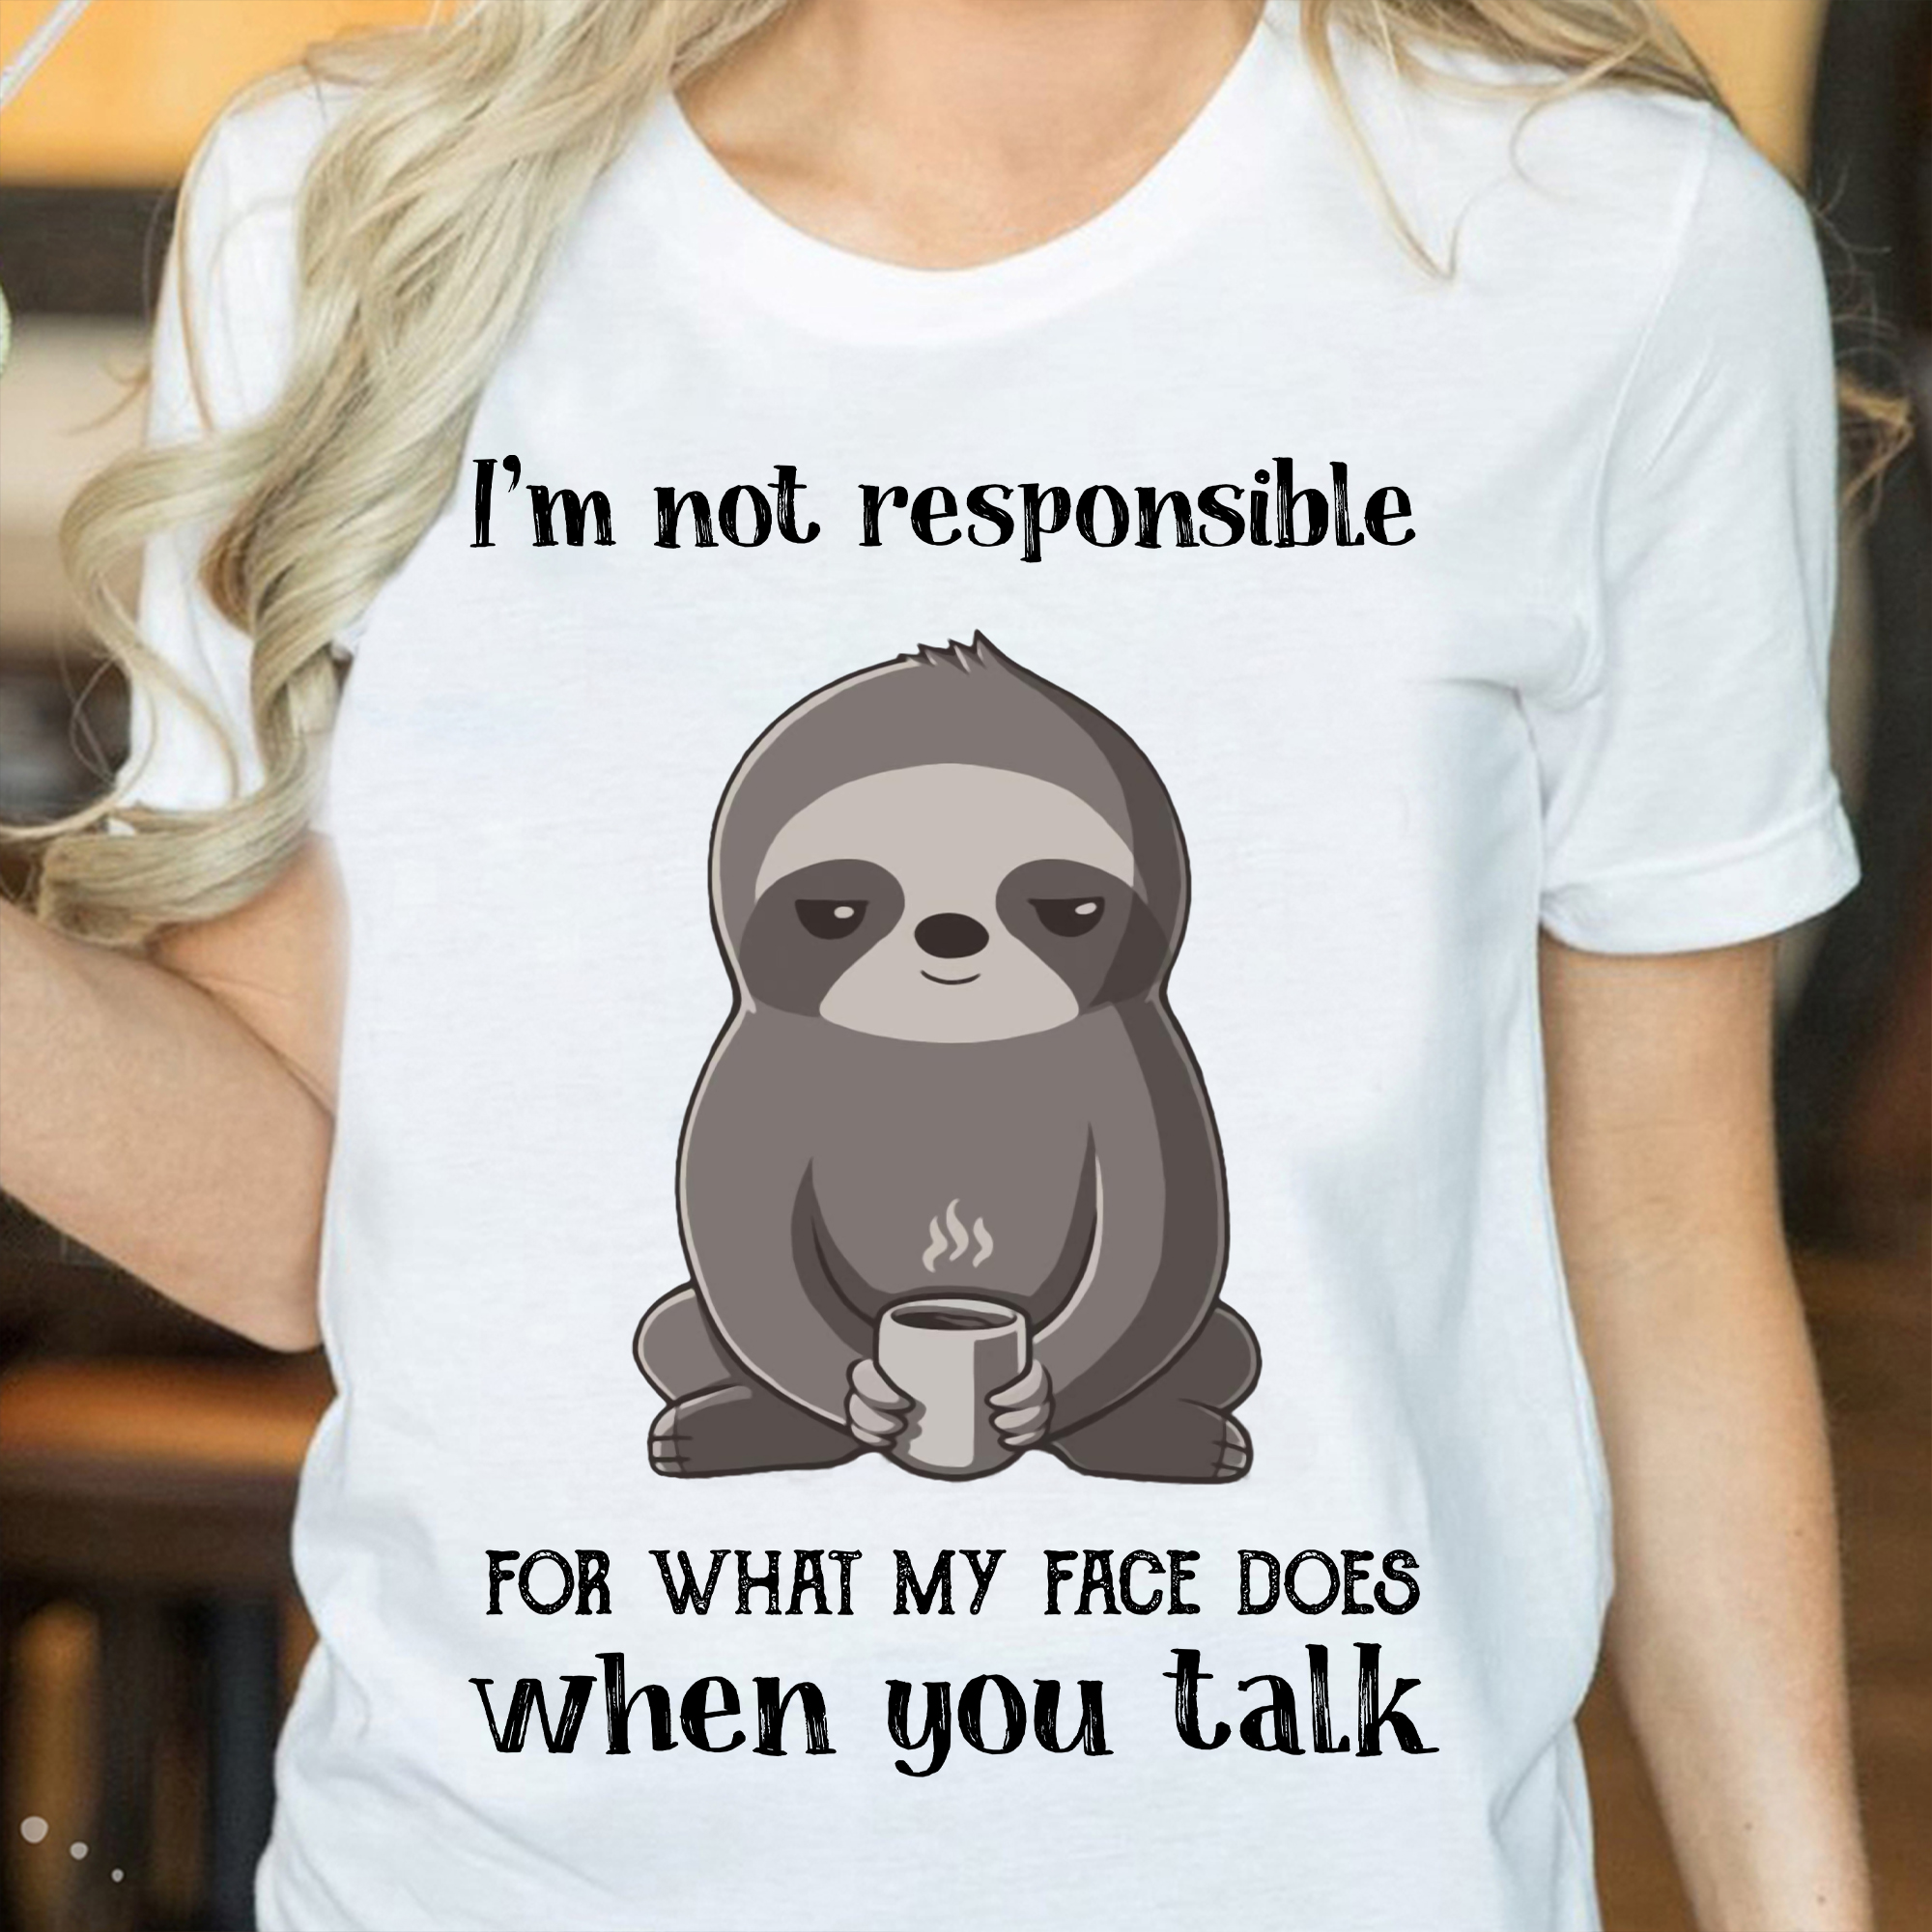 I'm not responsible for what my face does when you talk - Sloth and coffee